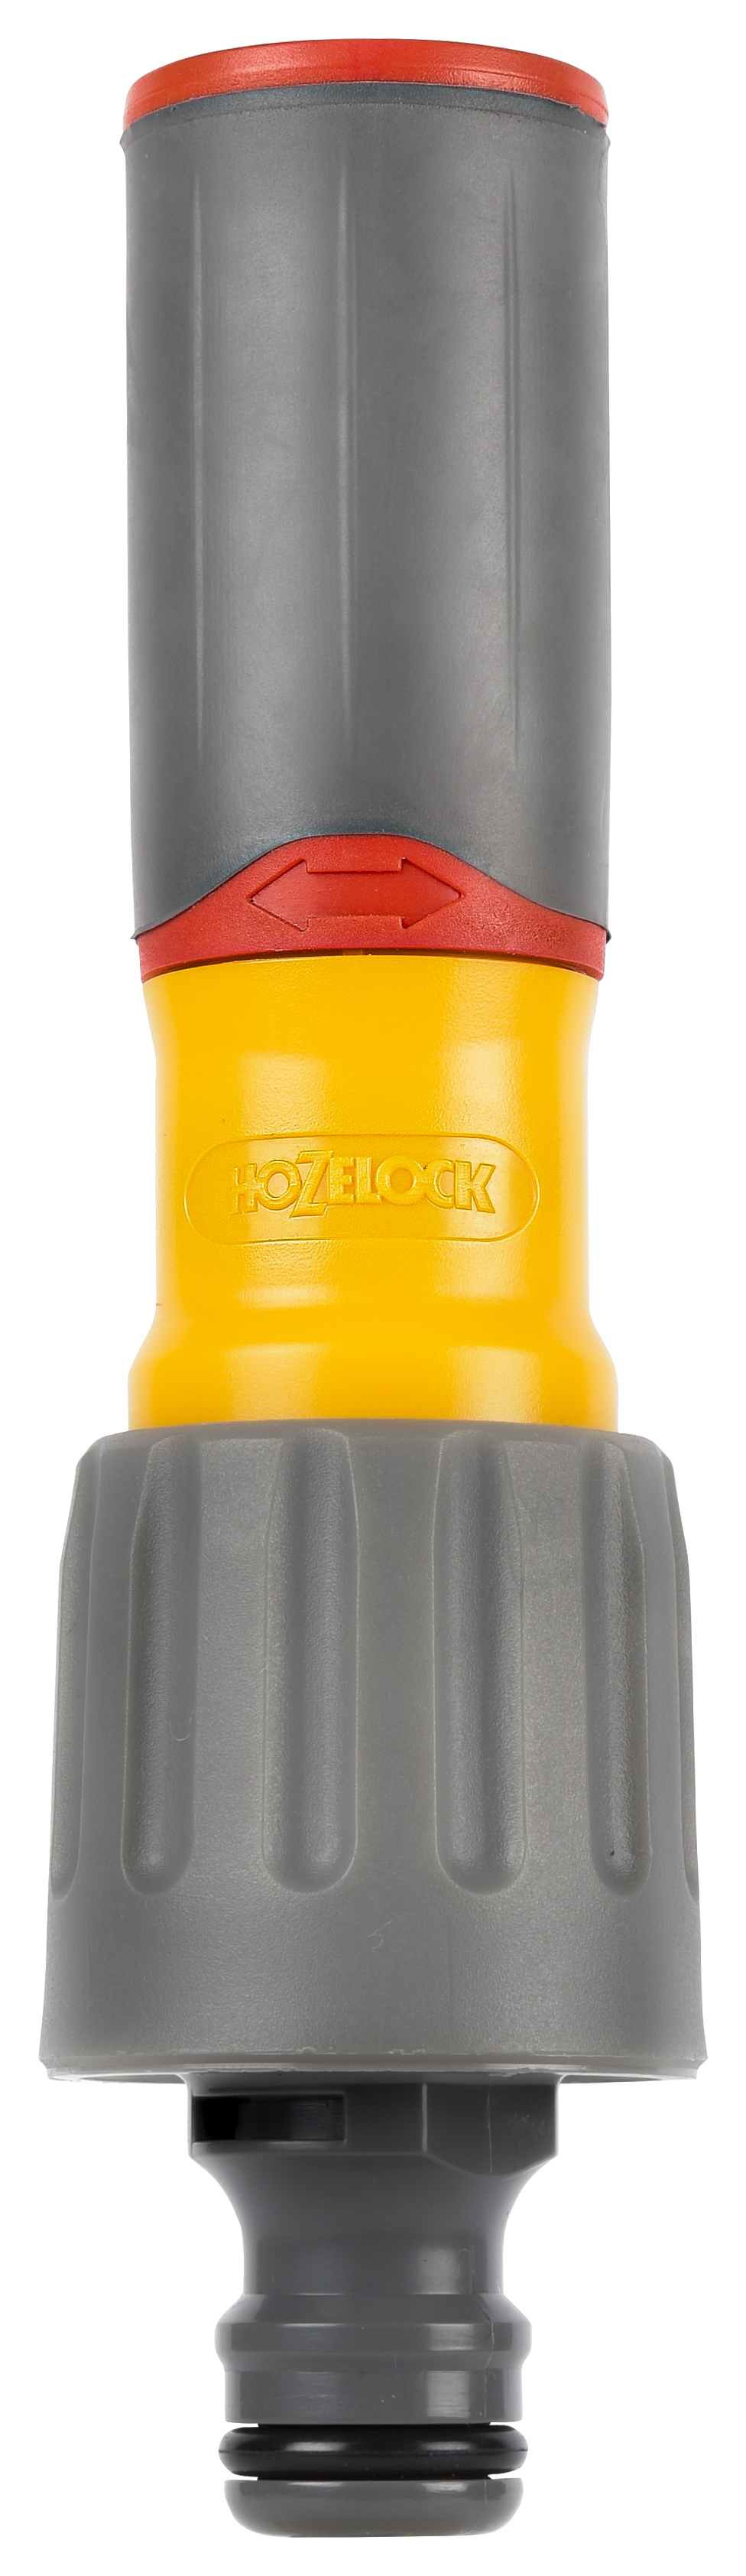 Image of Hozelock 3-in-1 Nozzle Plus, in Yellow and Grey